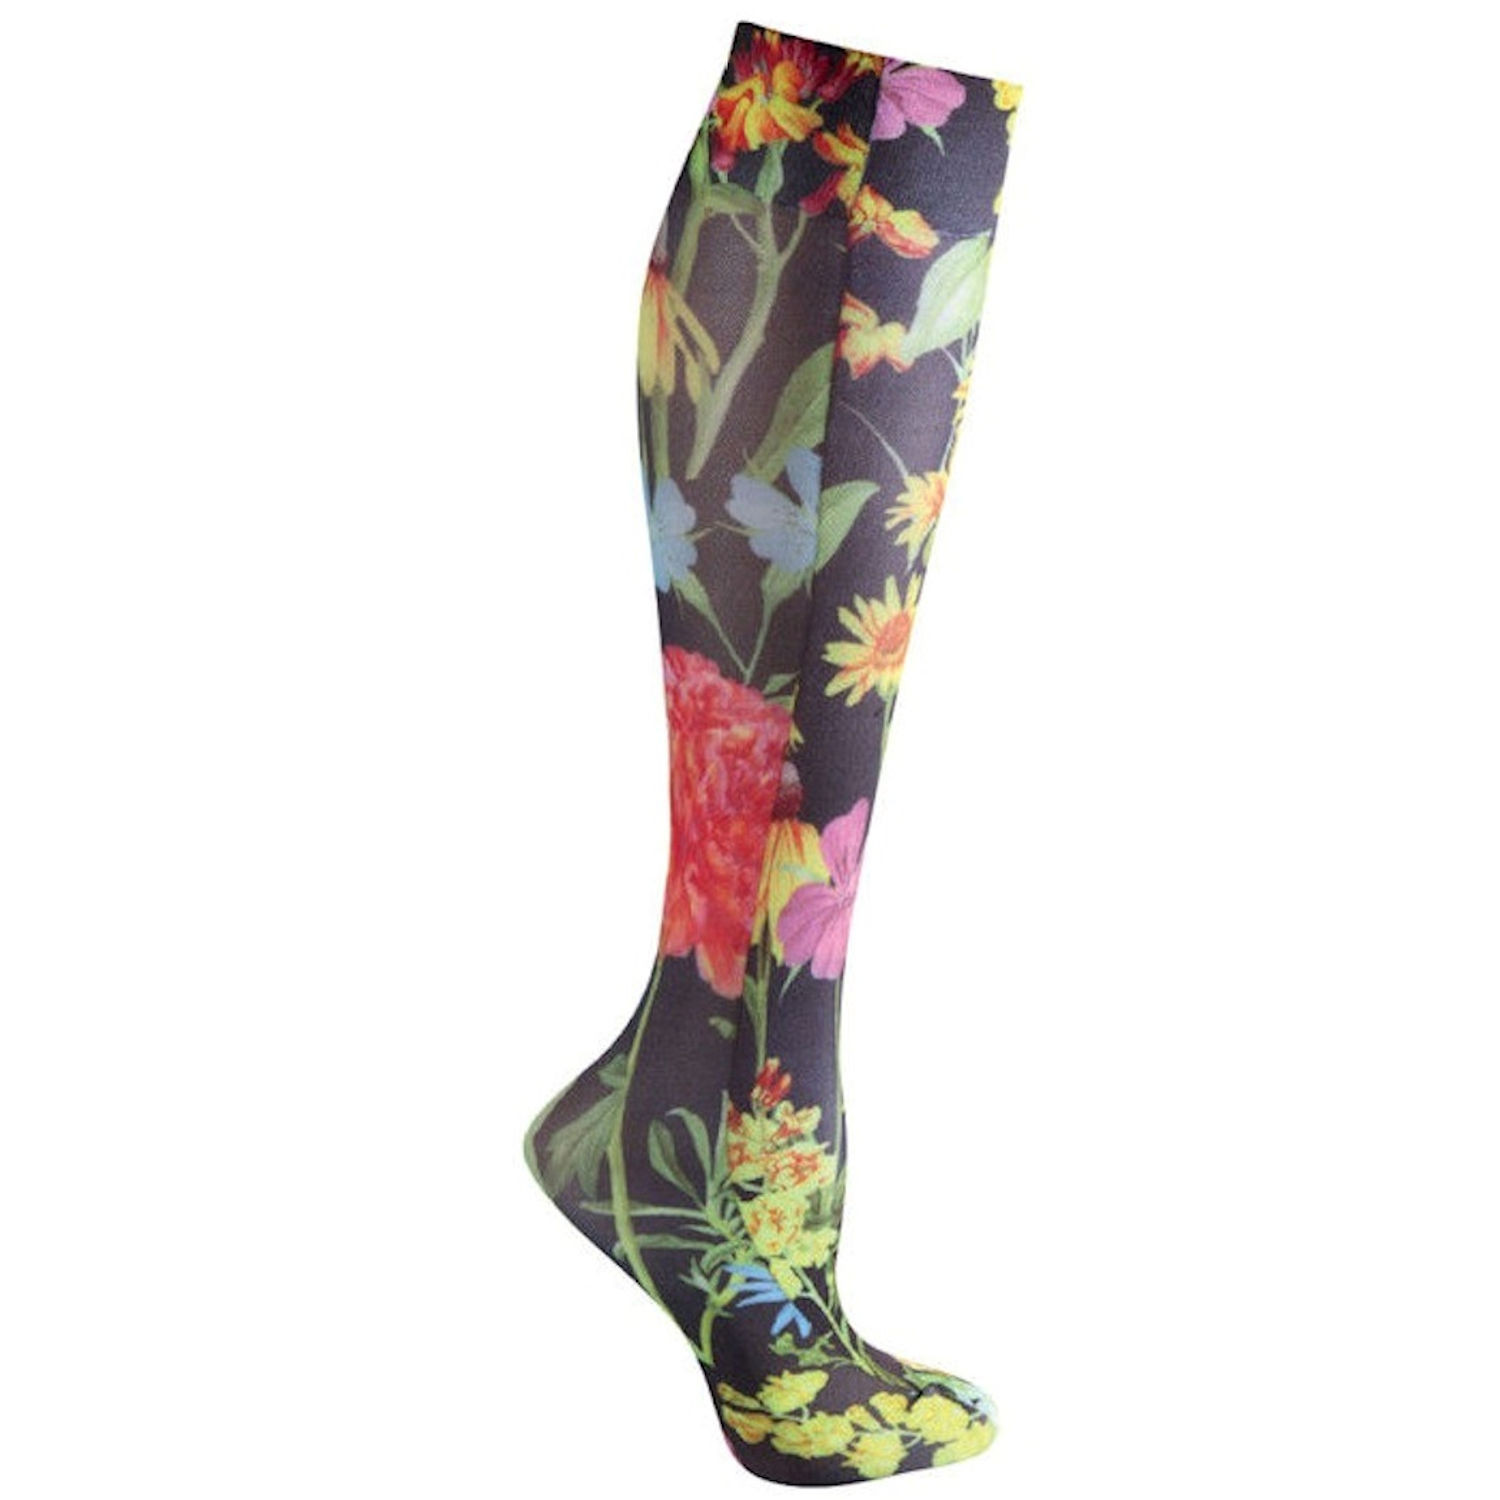 Printed Compression Knee High Stockings - Celeste Stein | Signals | FD5922